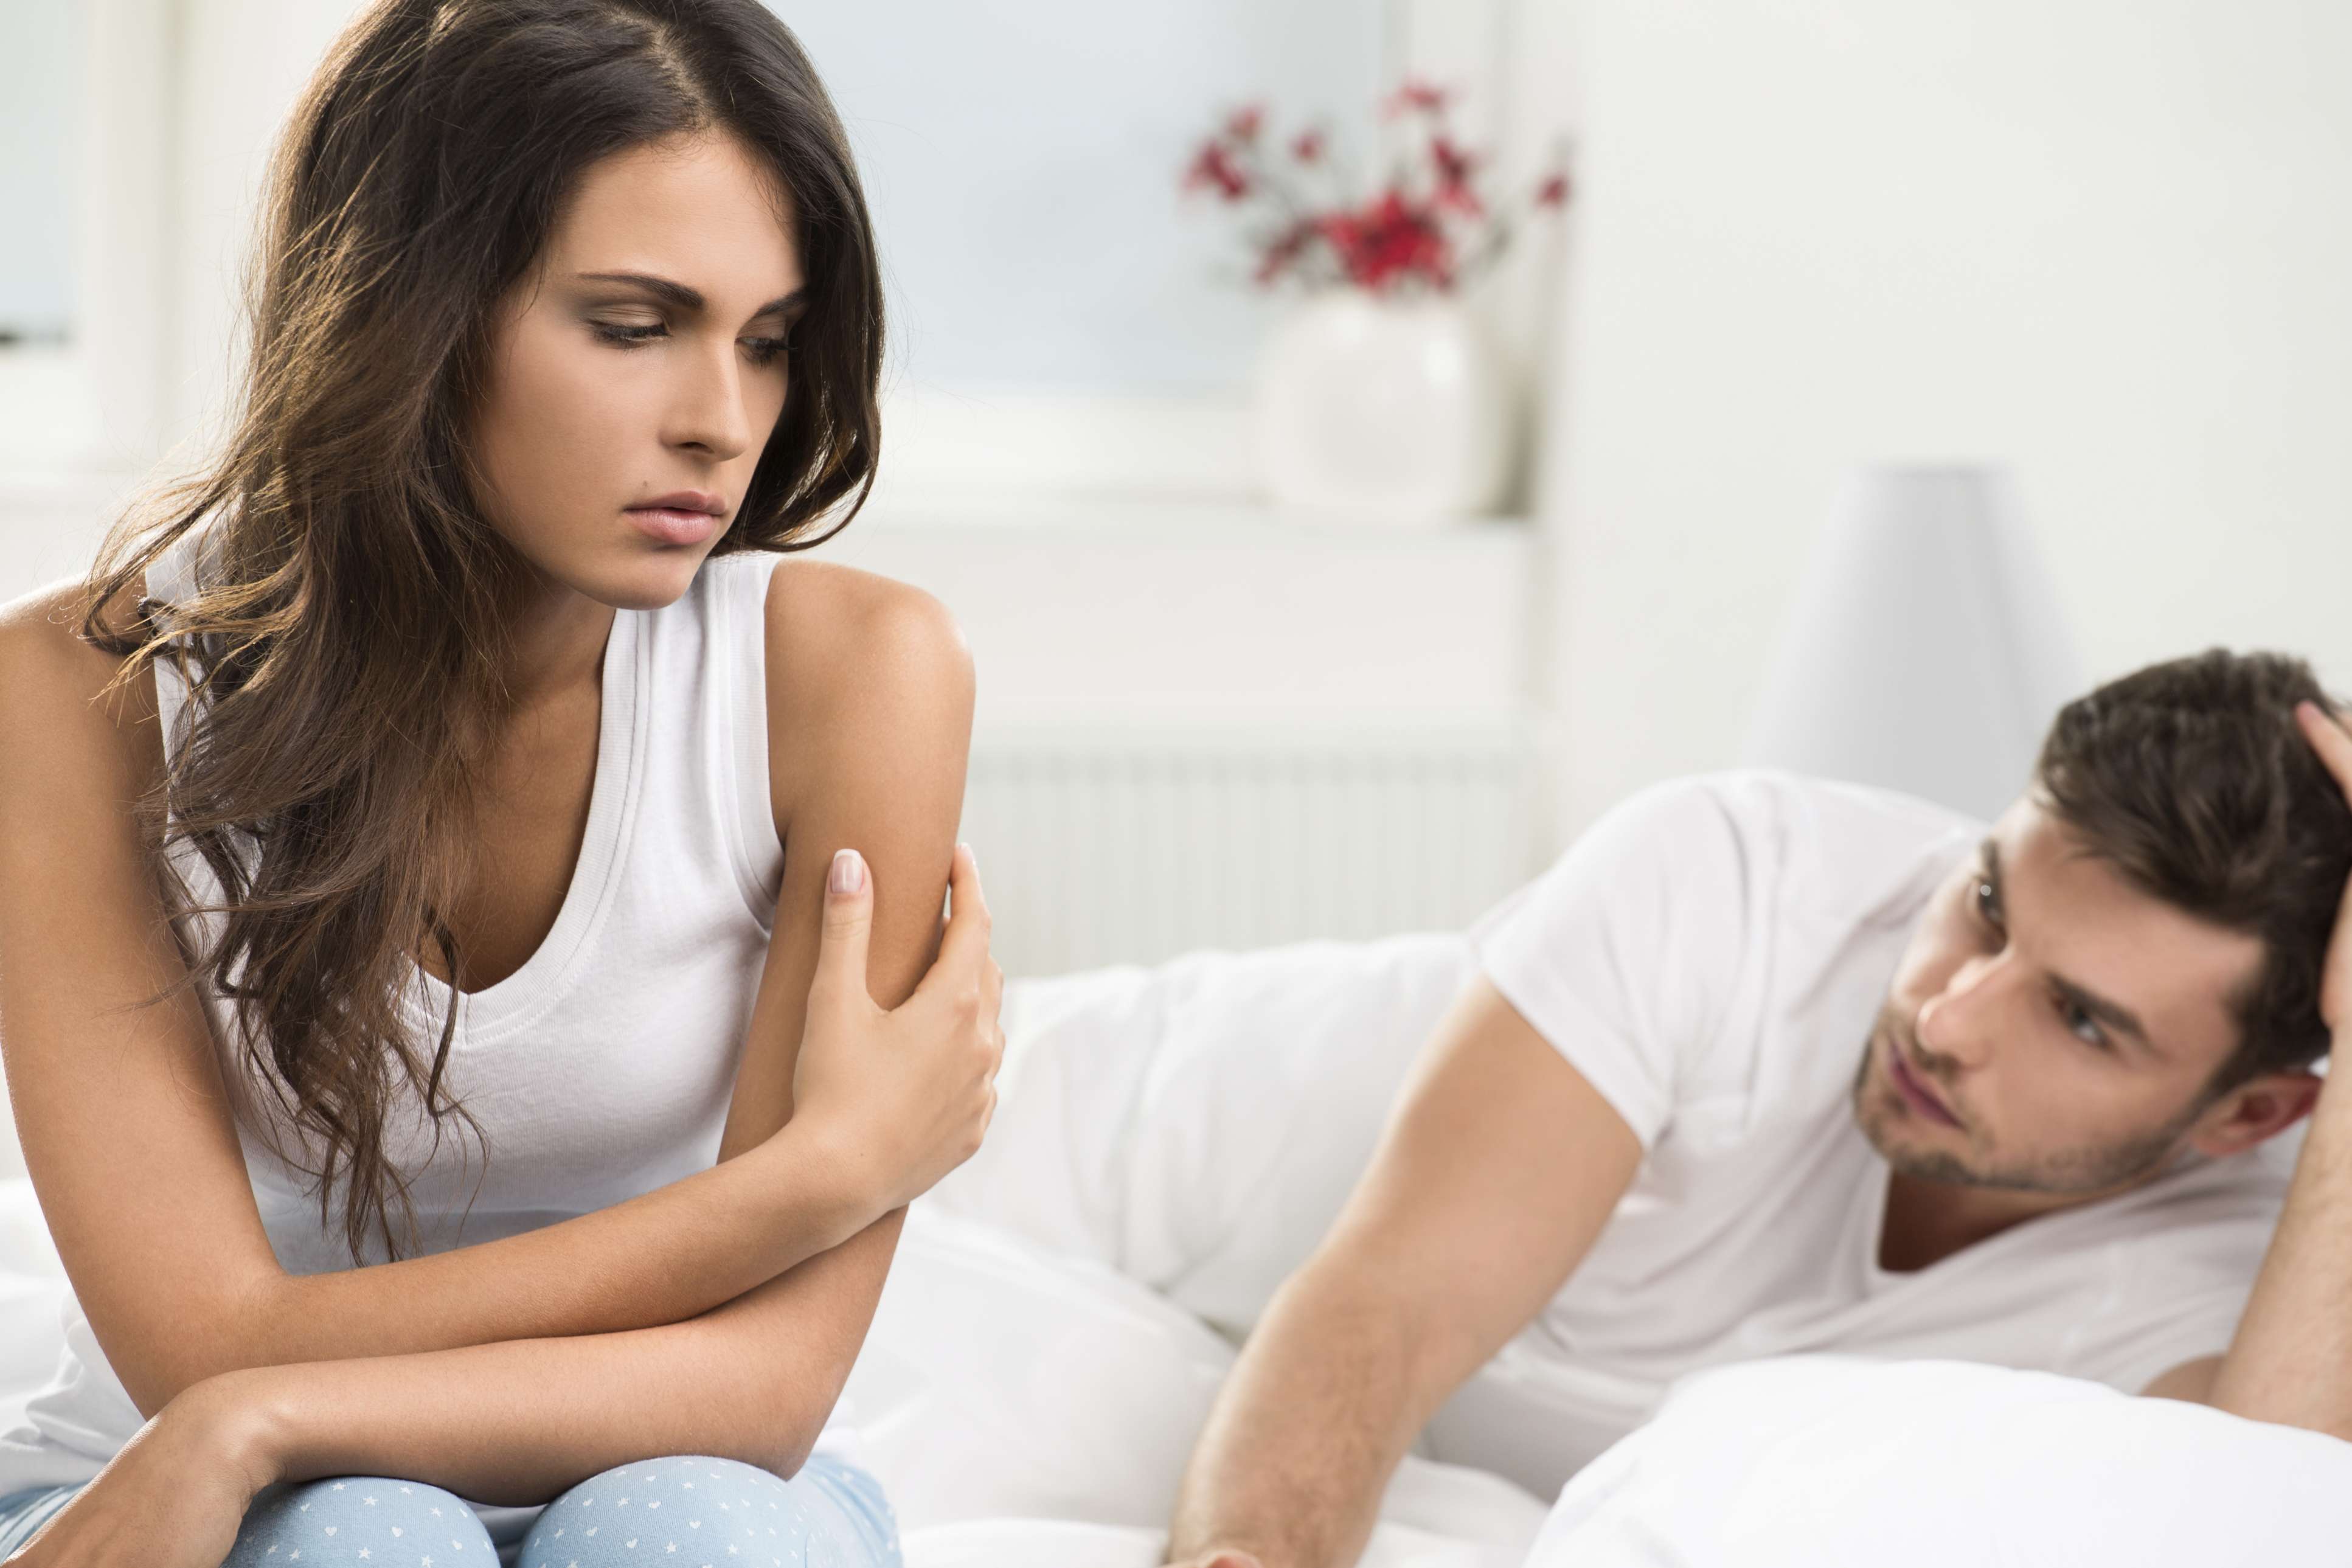 7 Worst Ways to Break Up with a Man